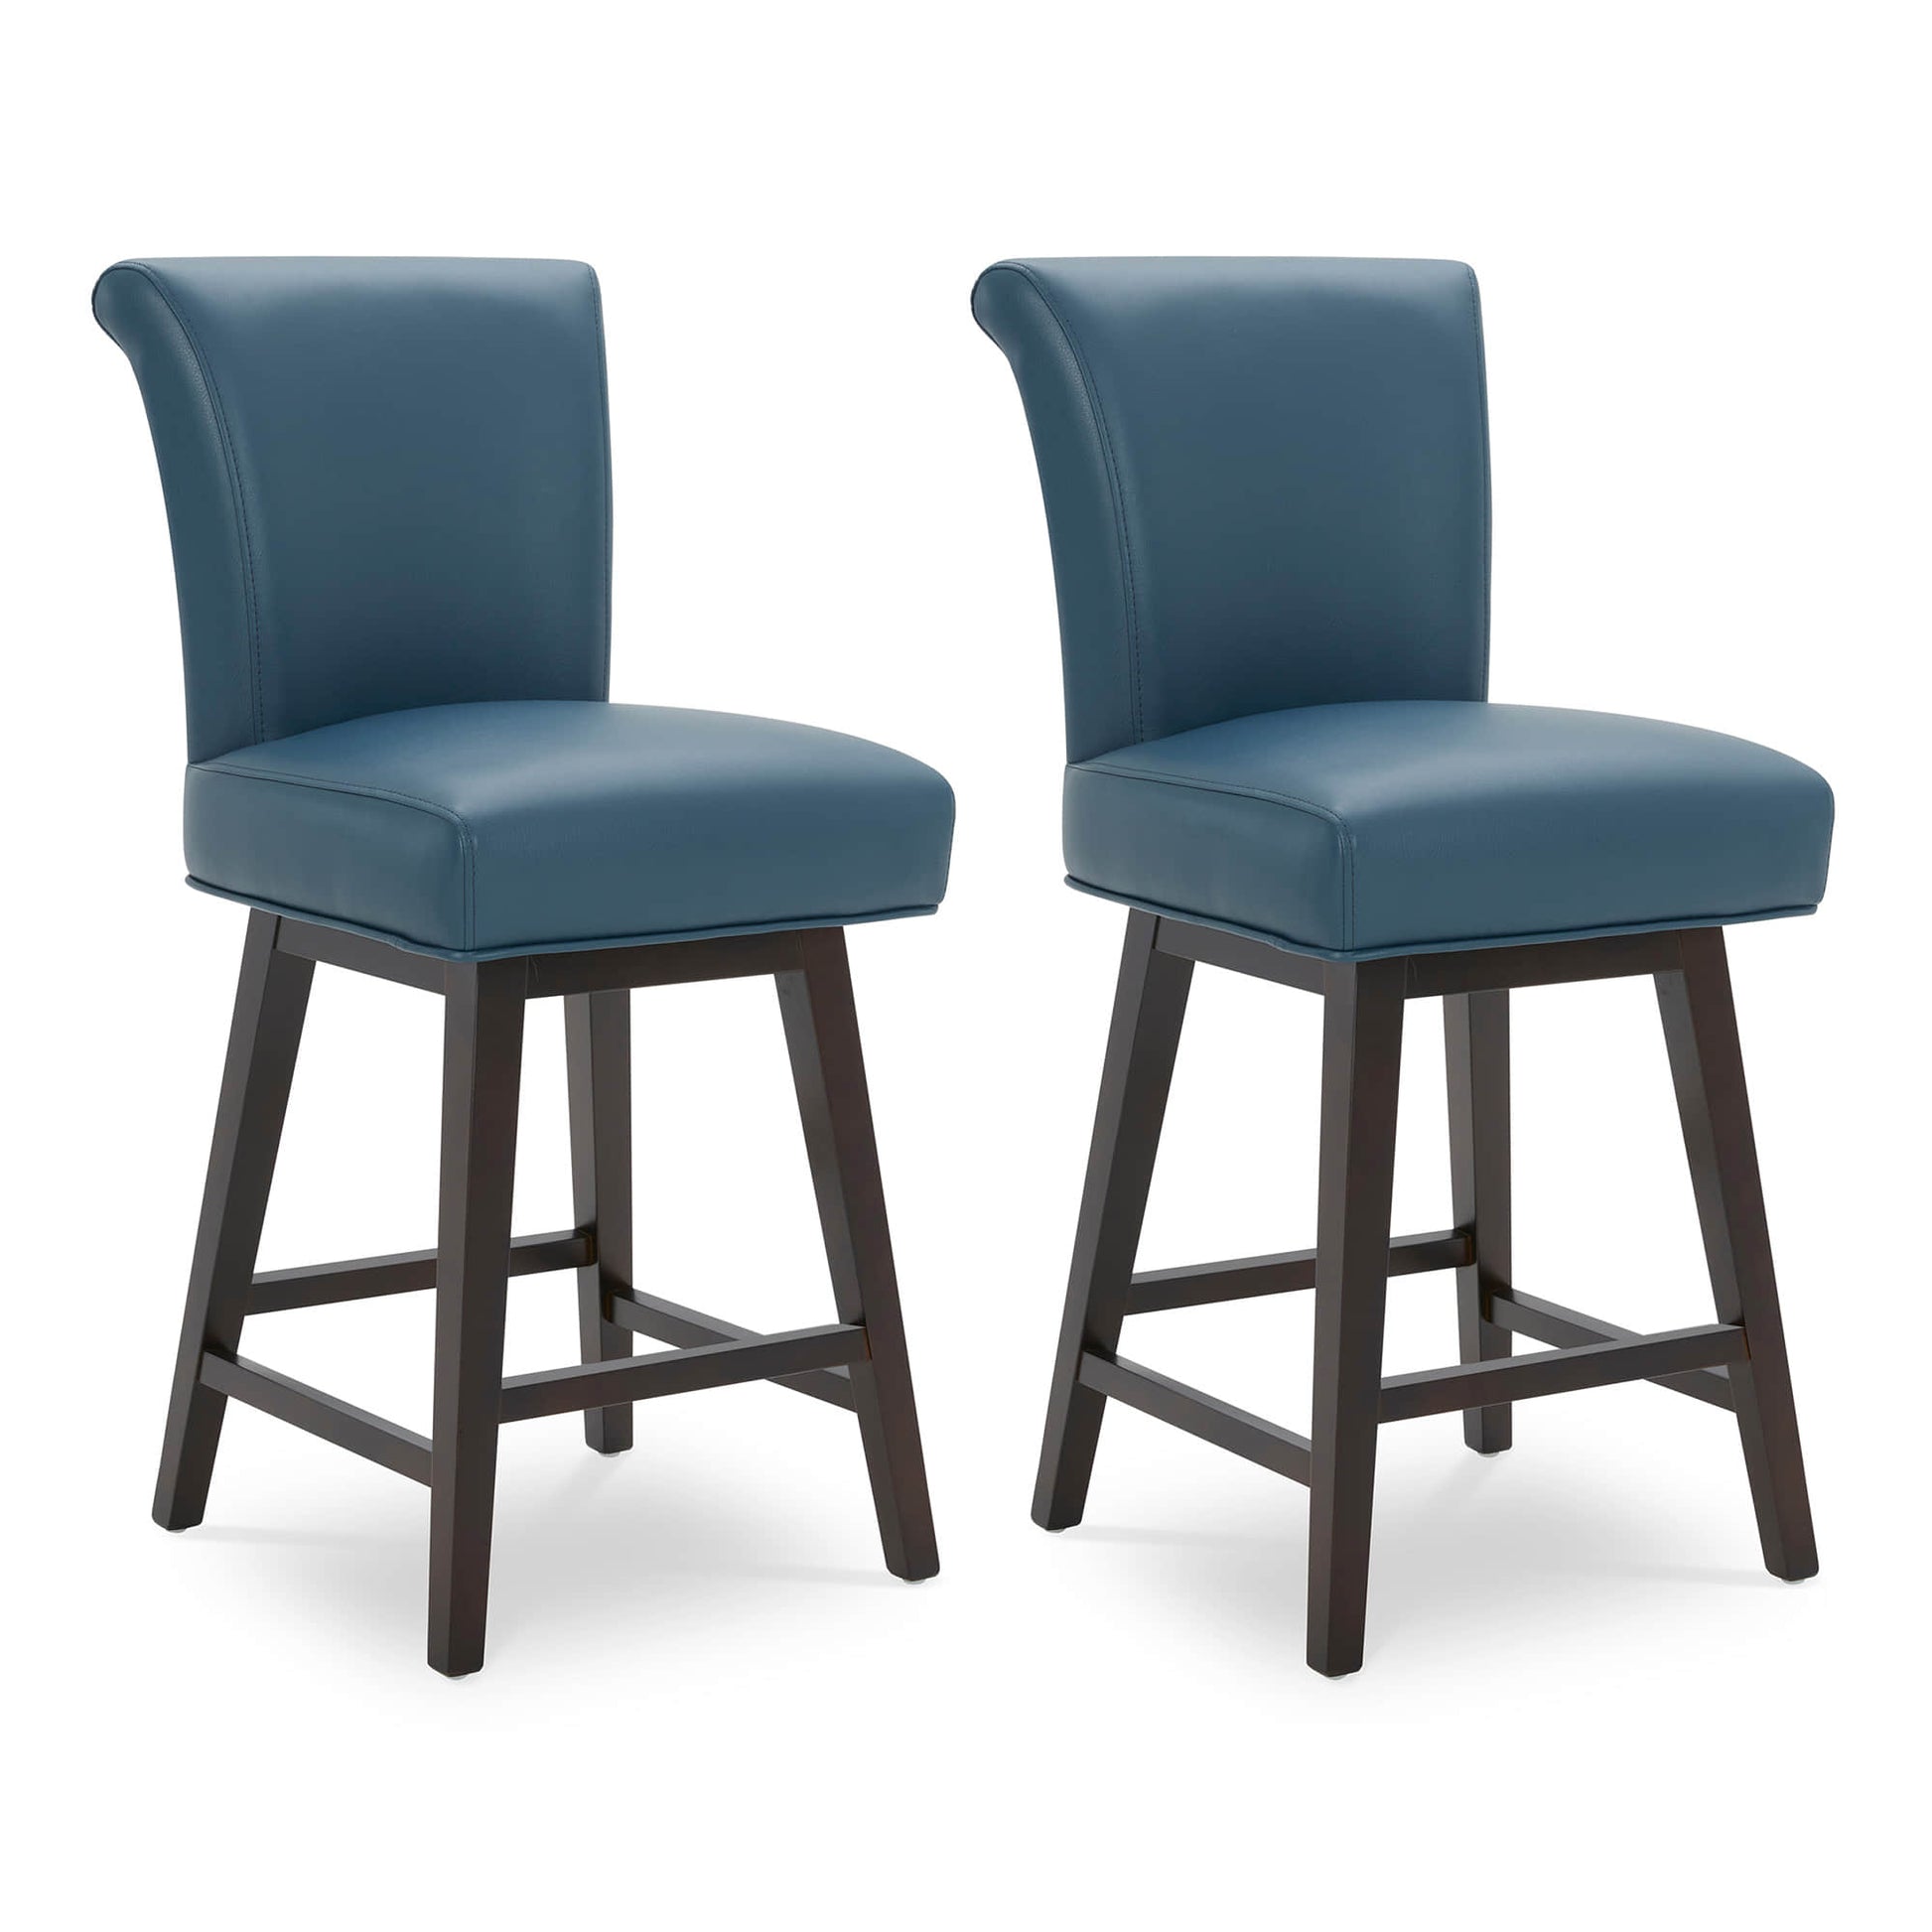 CHITA LIVING-Alina Modern Swivel Counter Stool-Counter Stools-Faux Leather-Blue-2-Pack